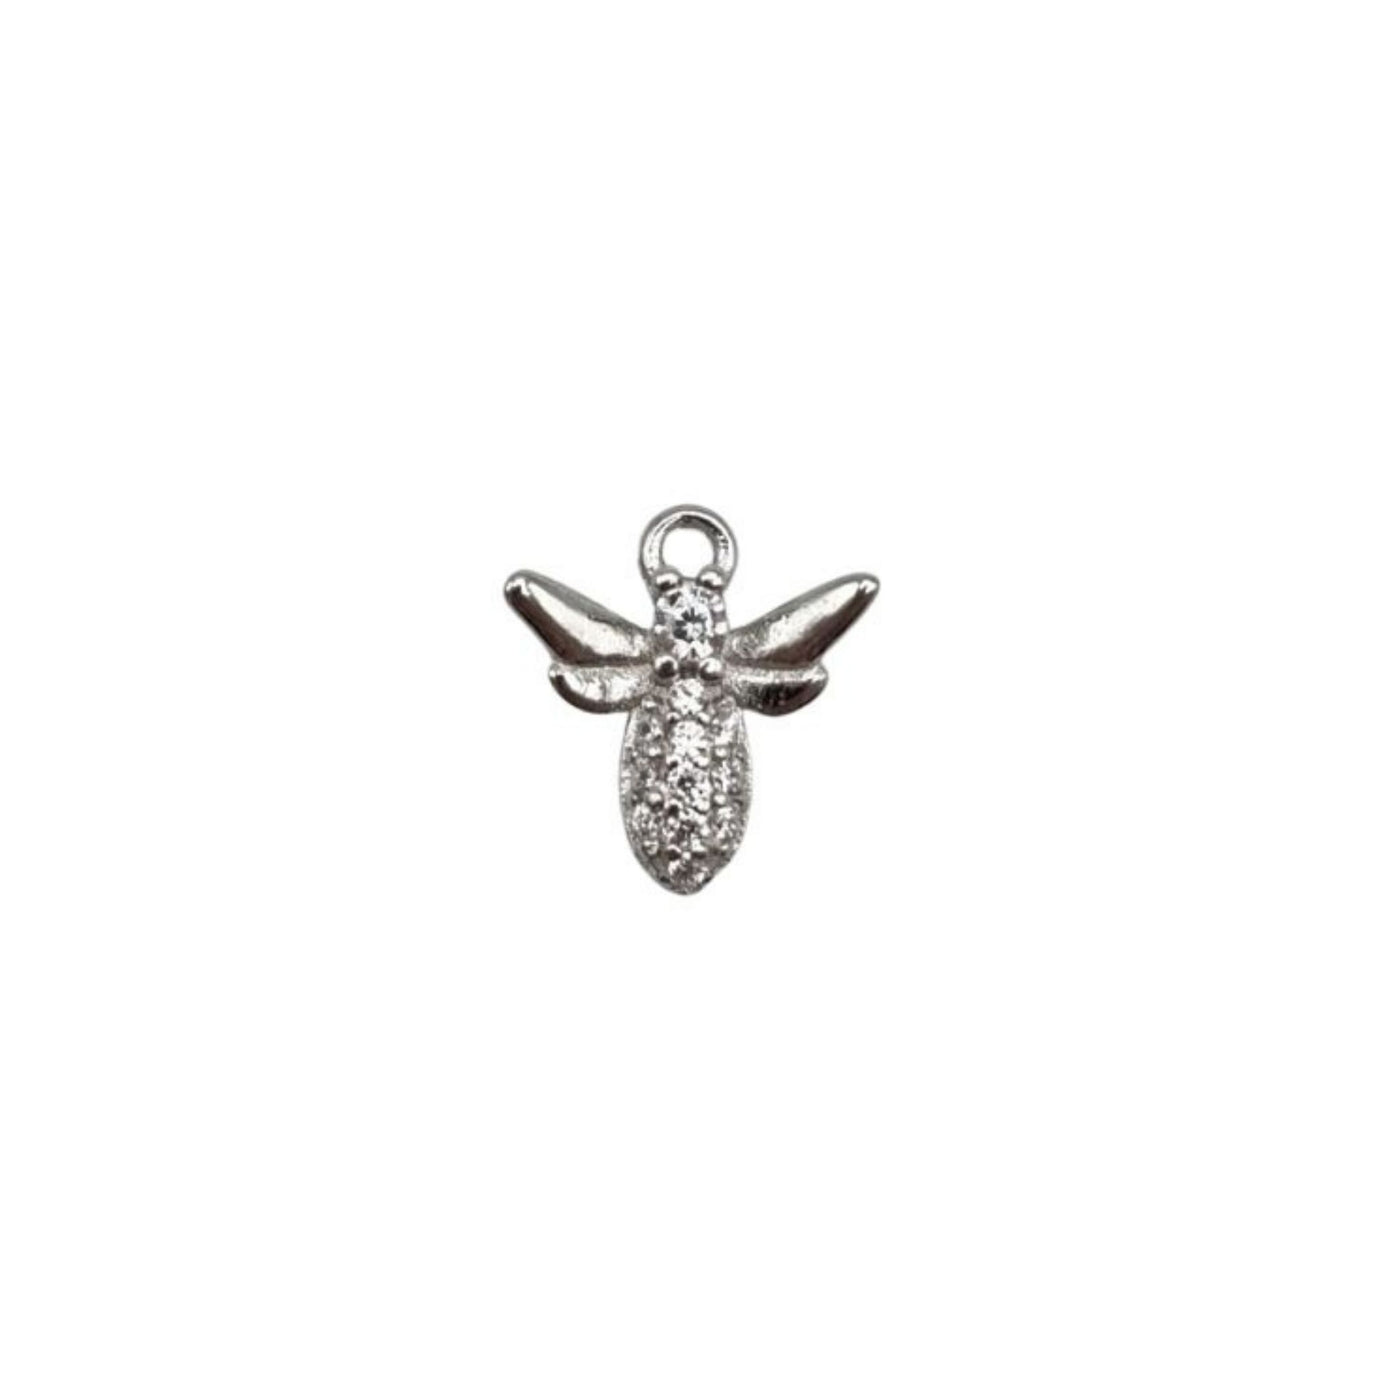 Pack of 5 Bee charms in silver